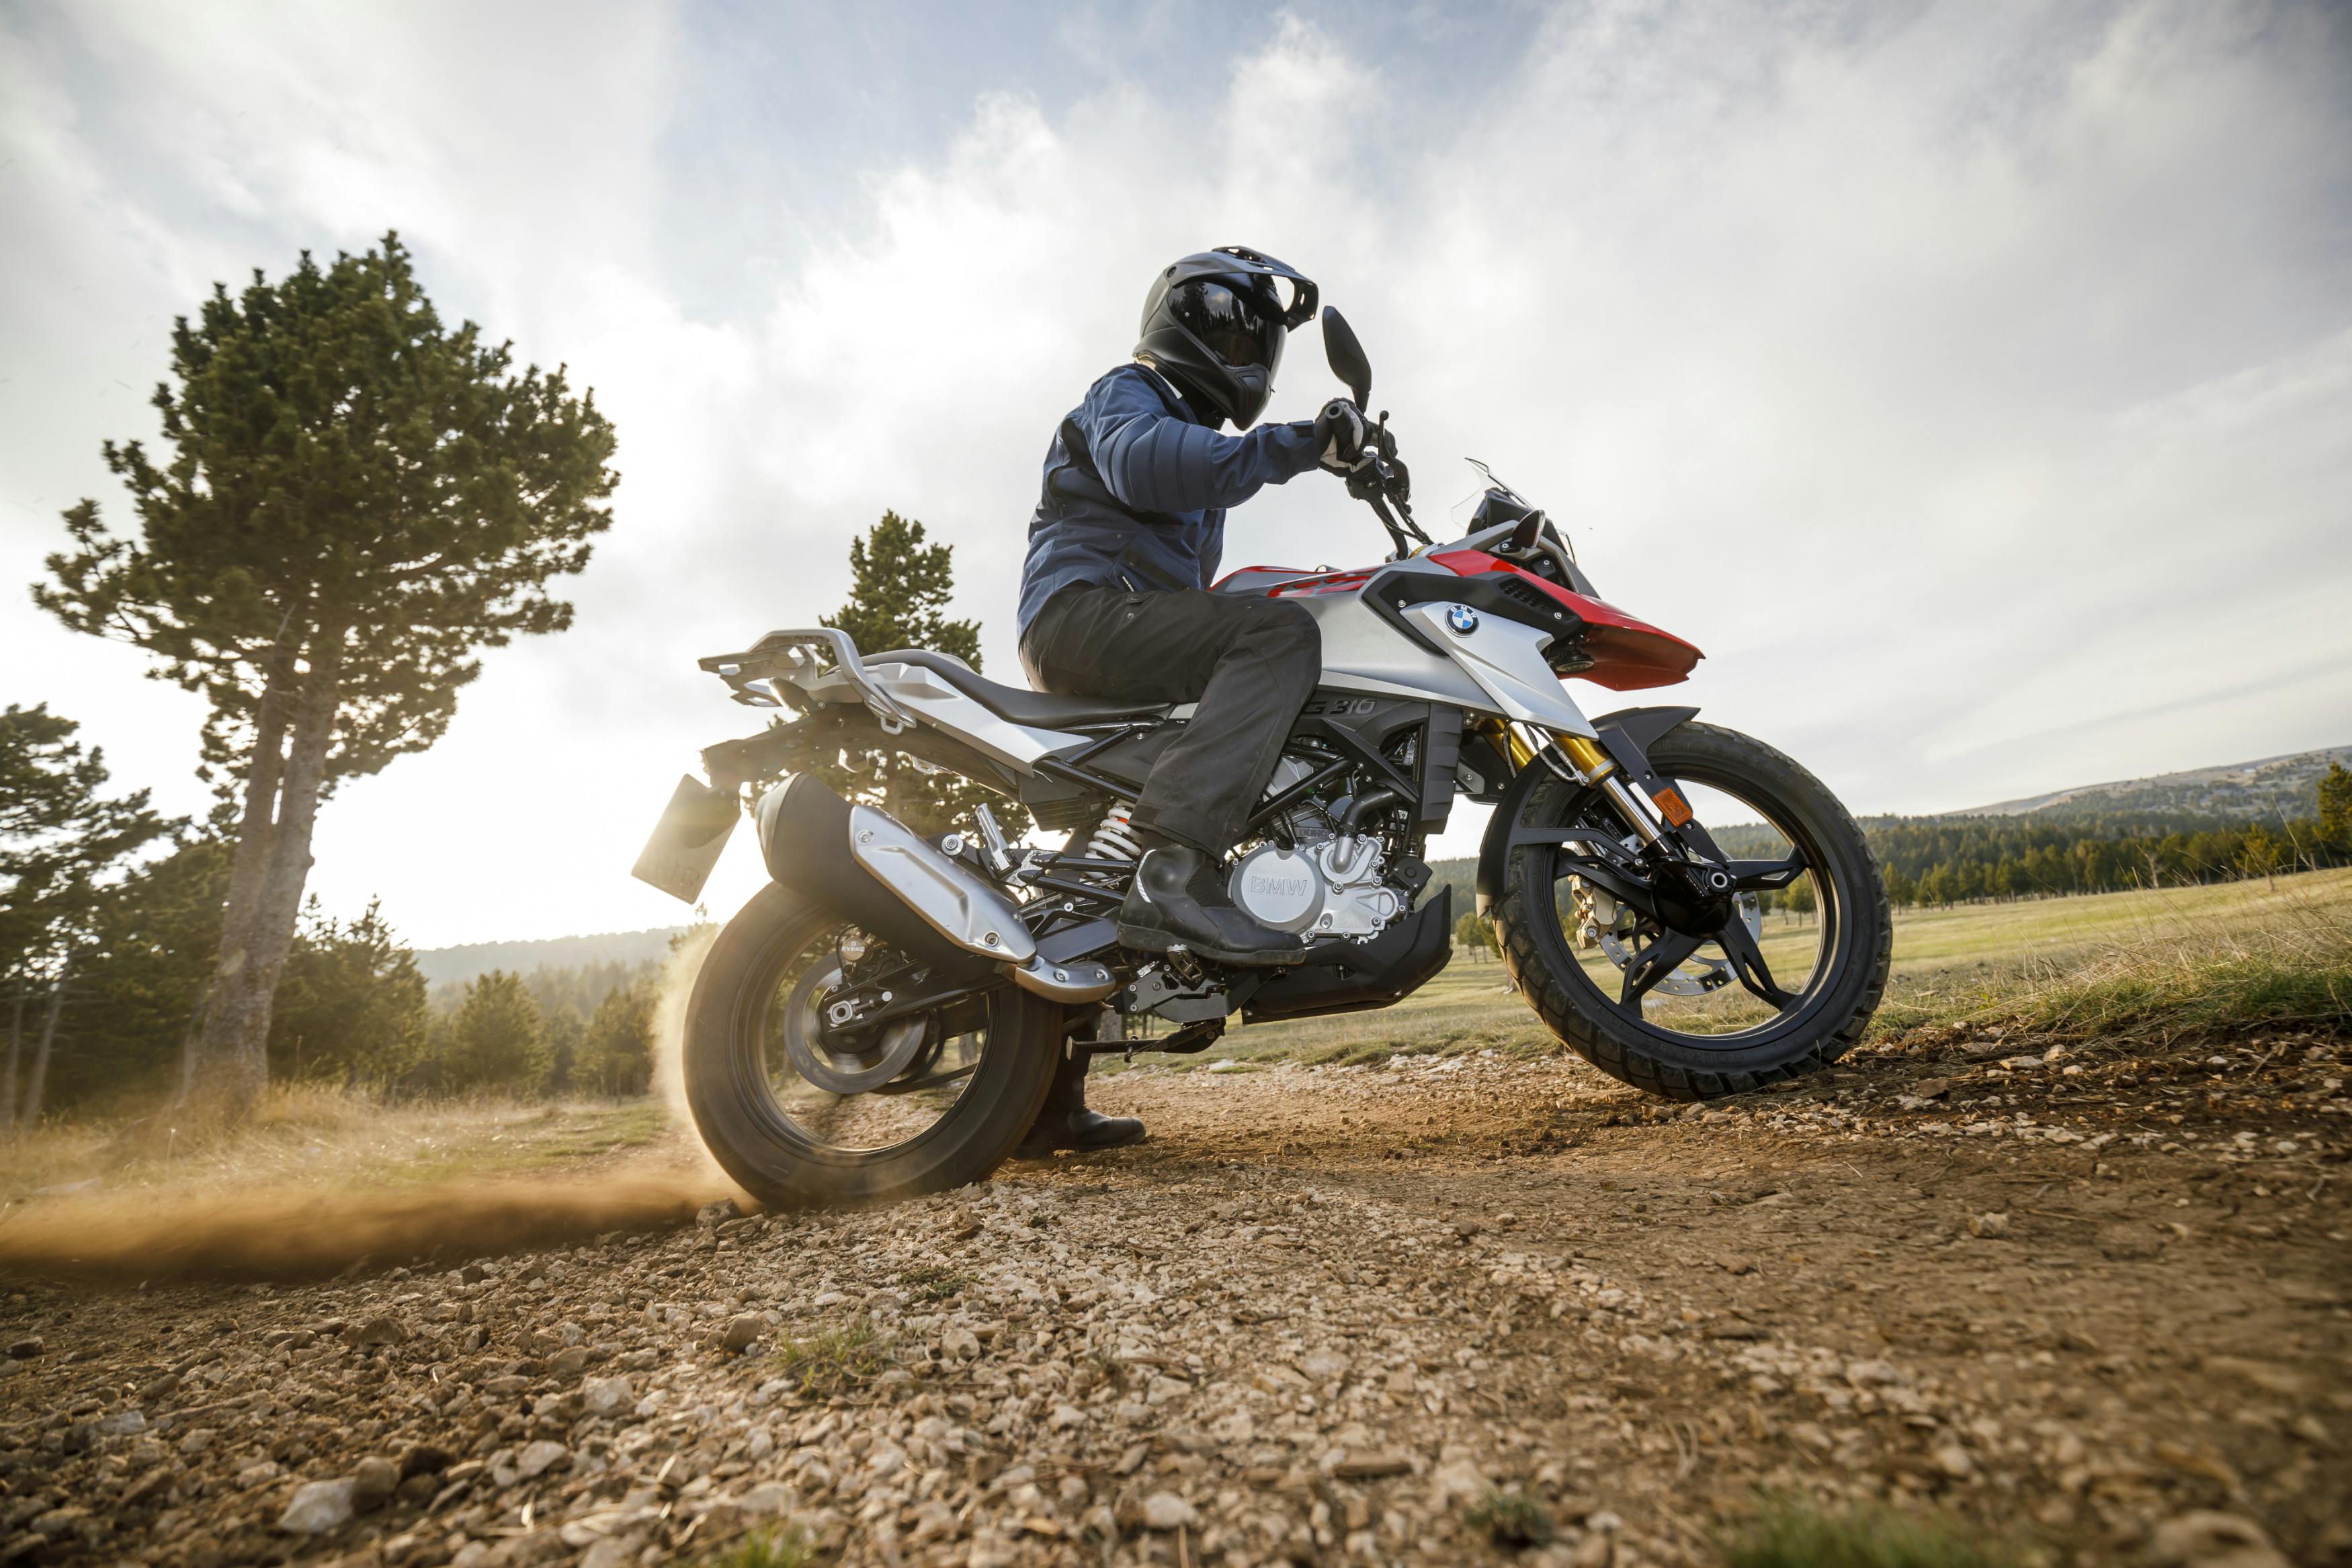 BMW G 310 GS being ridden on a off road